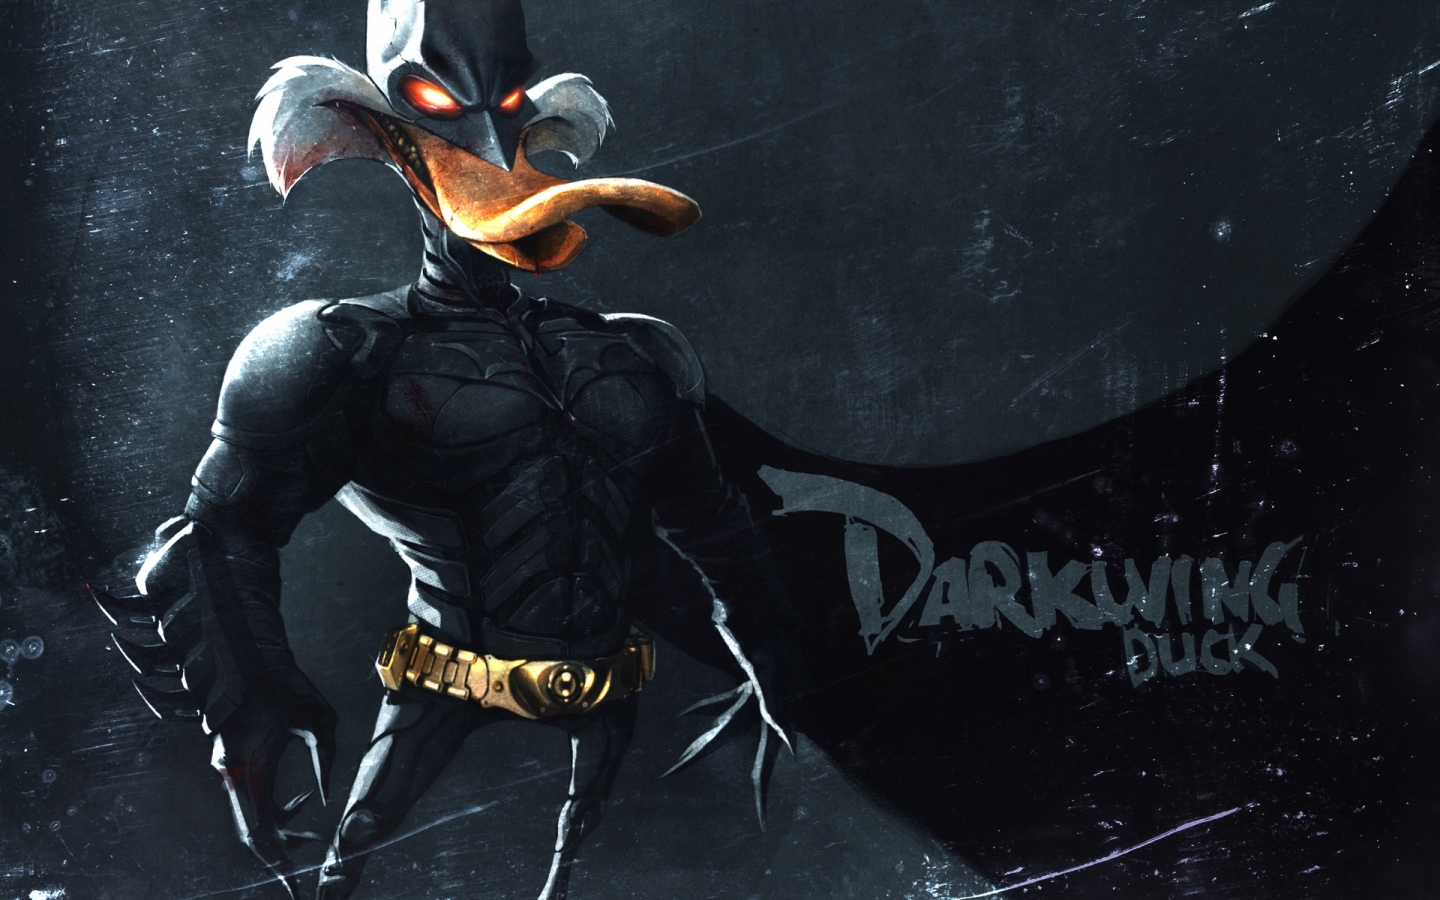 Darkwing Duck Mask for 1440 x 900 widescreen resolution